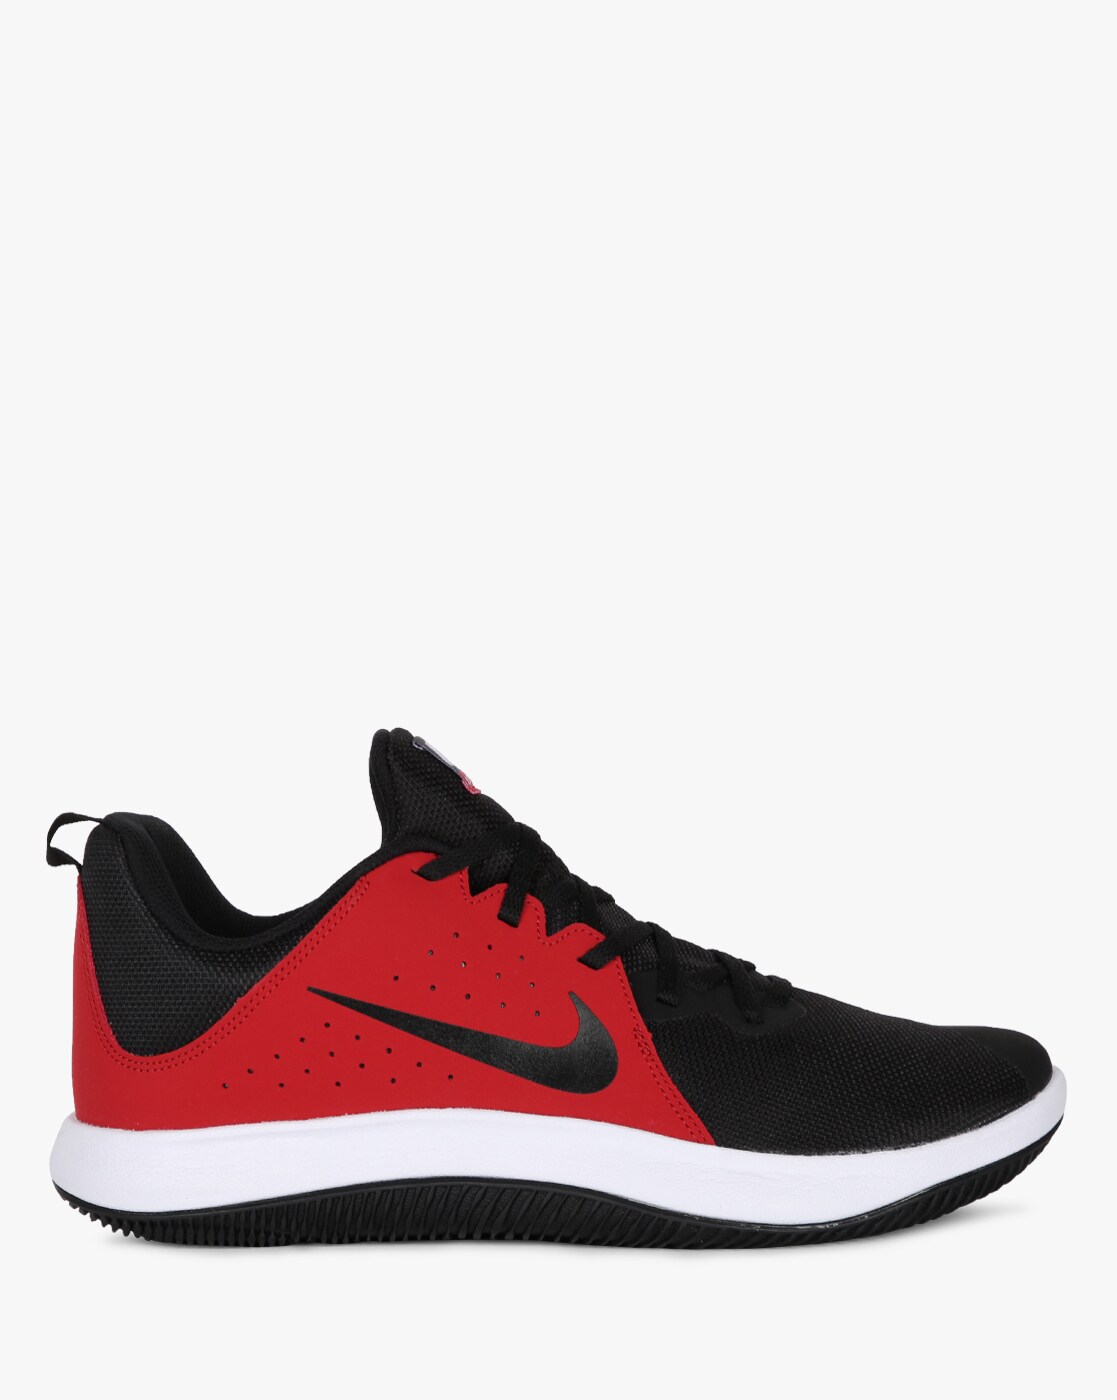 red and black sneakers